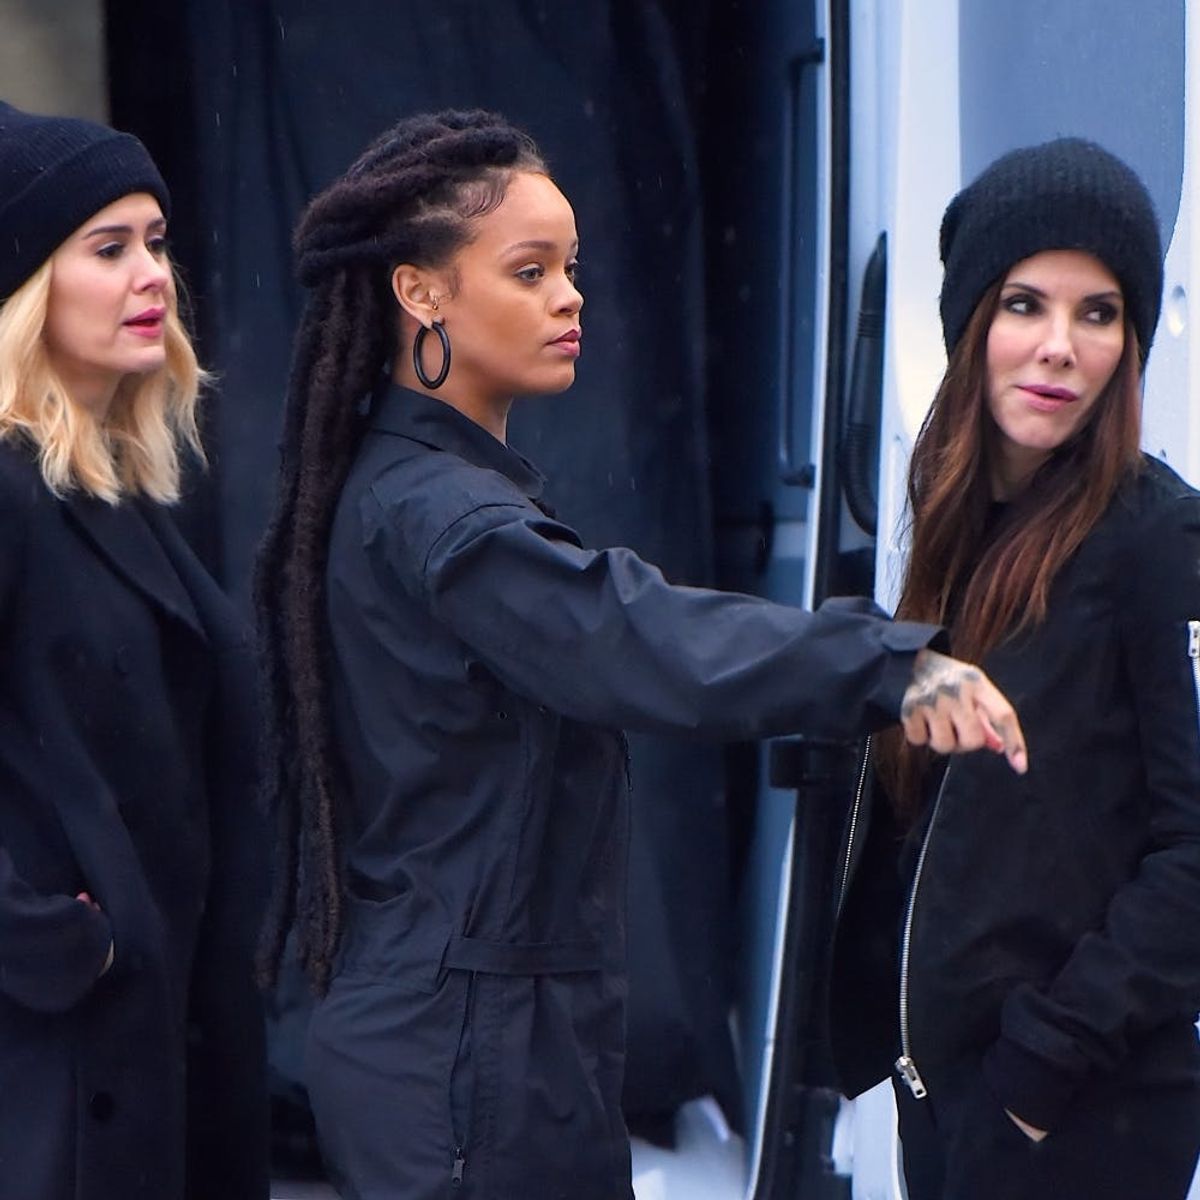 Here’s Your First Look at Sandra Bullock, Rihanna, Mindy Kaling and More in Ocean’s 8